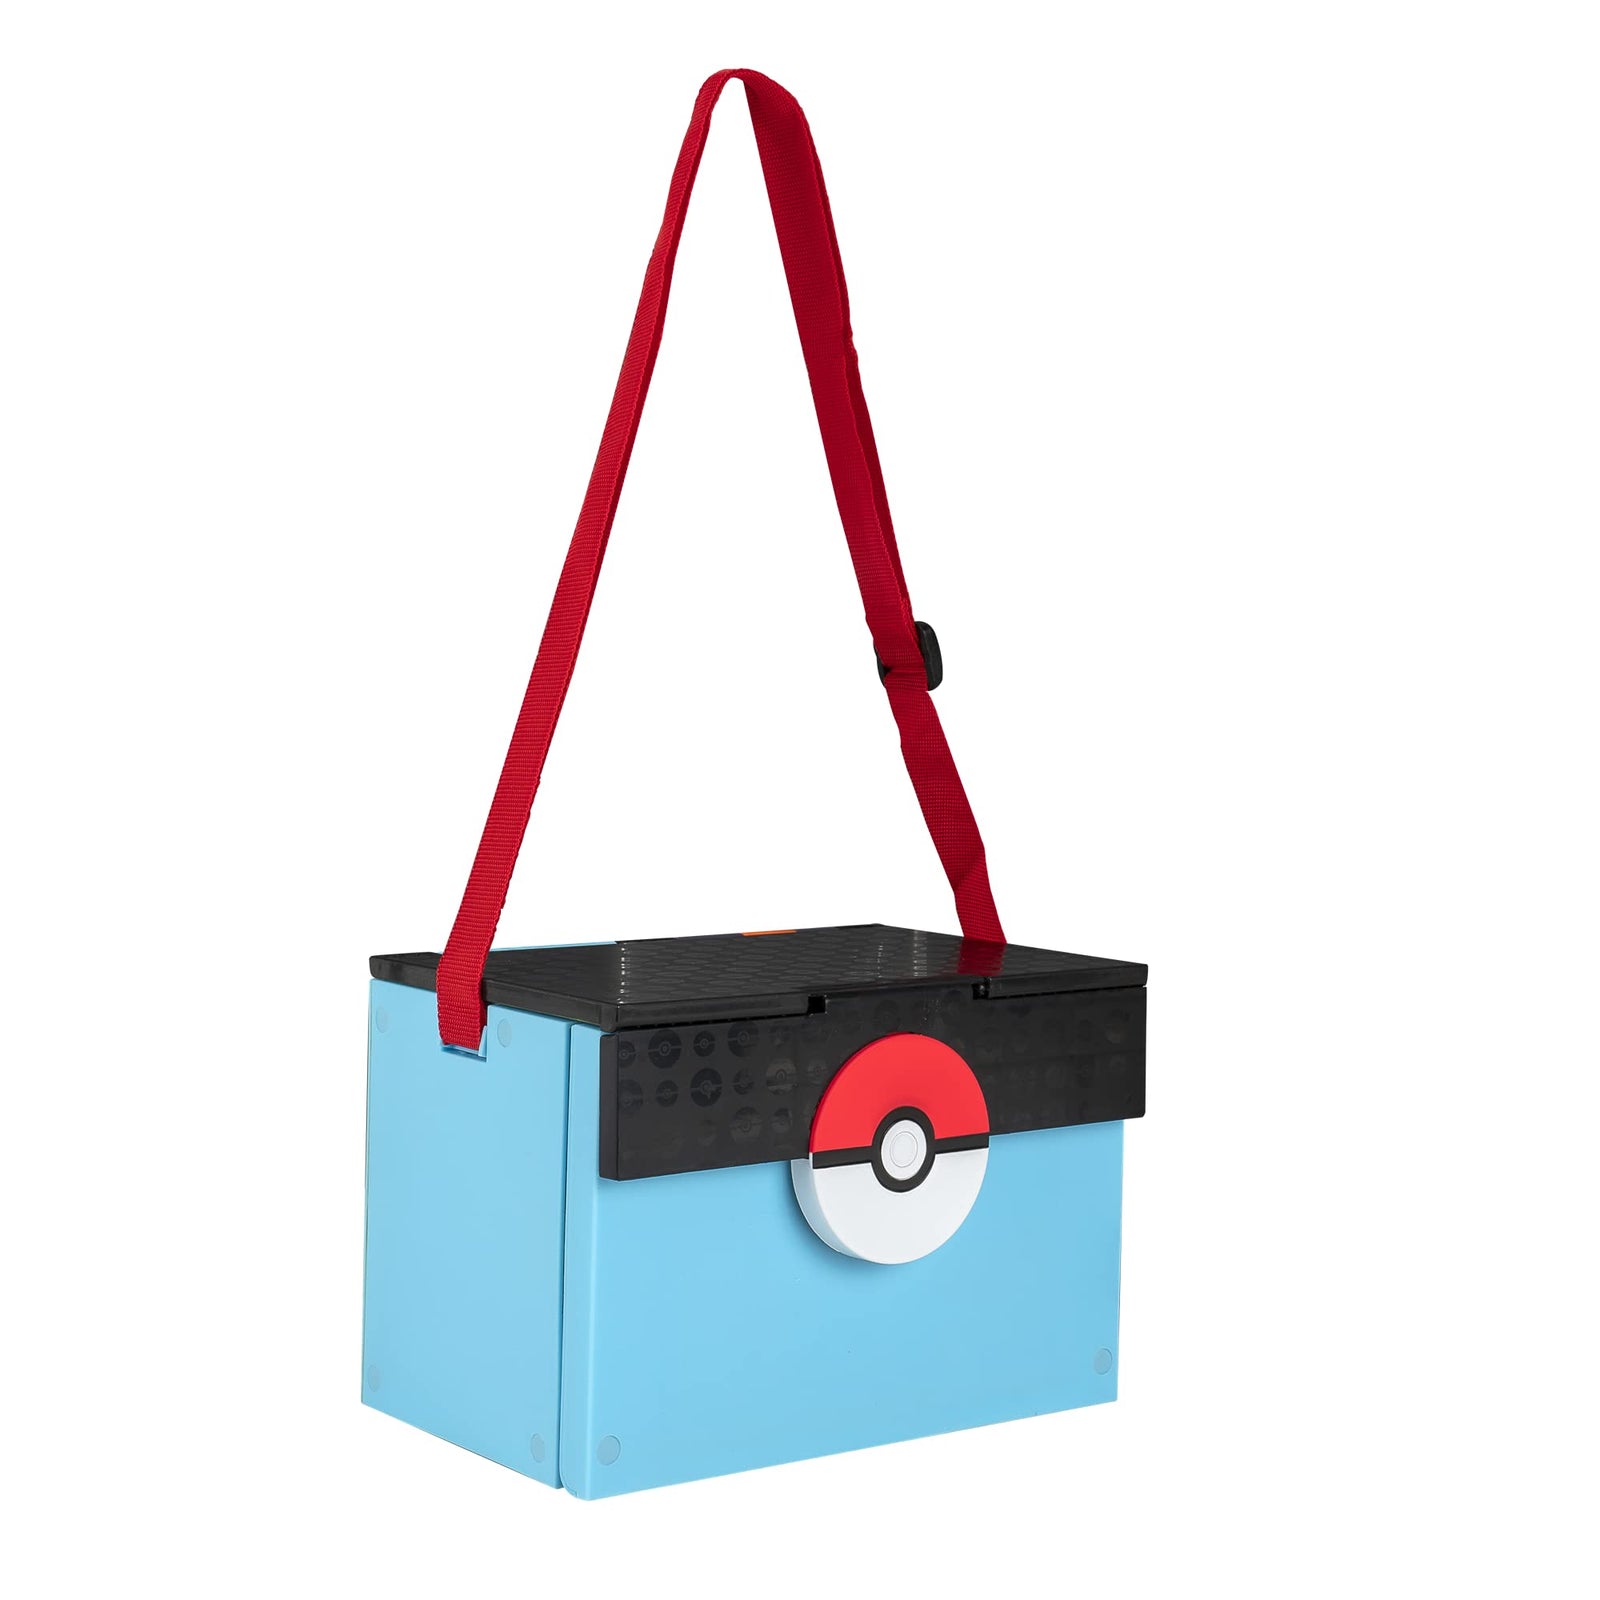 Pokemon Carry ‘N’ Go Volcano Playset with 4 Included 2-inch, Pikachu, Charmander, Bulbasaur, and Squirtle! Bring Everywhere - Playsets for Kids Fans